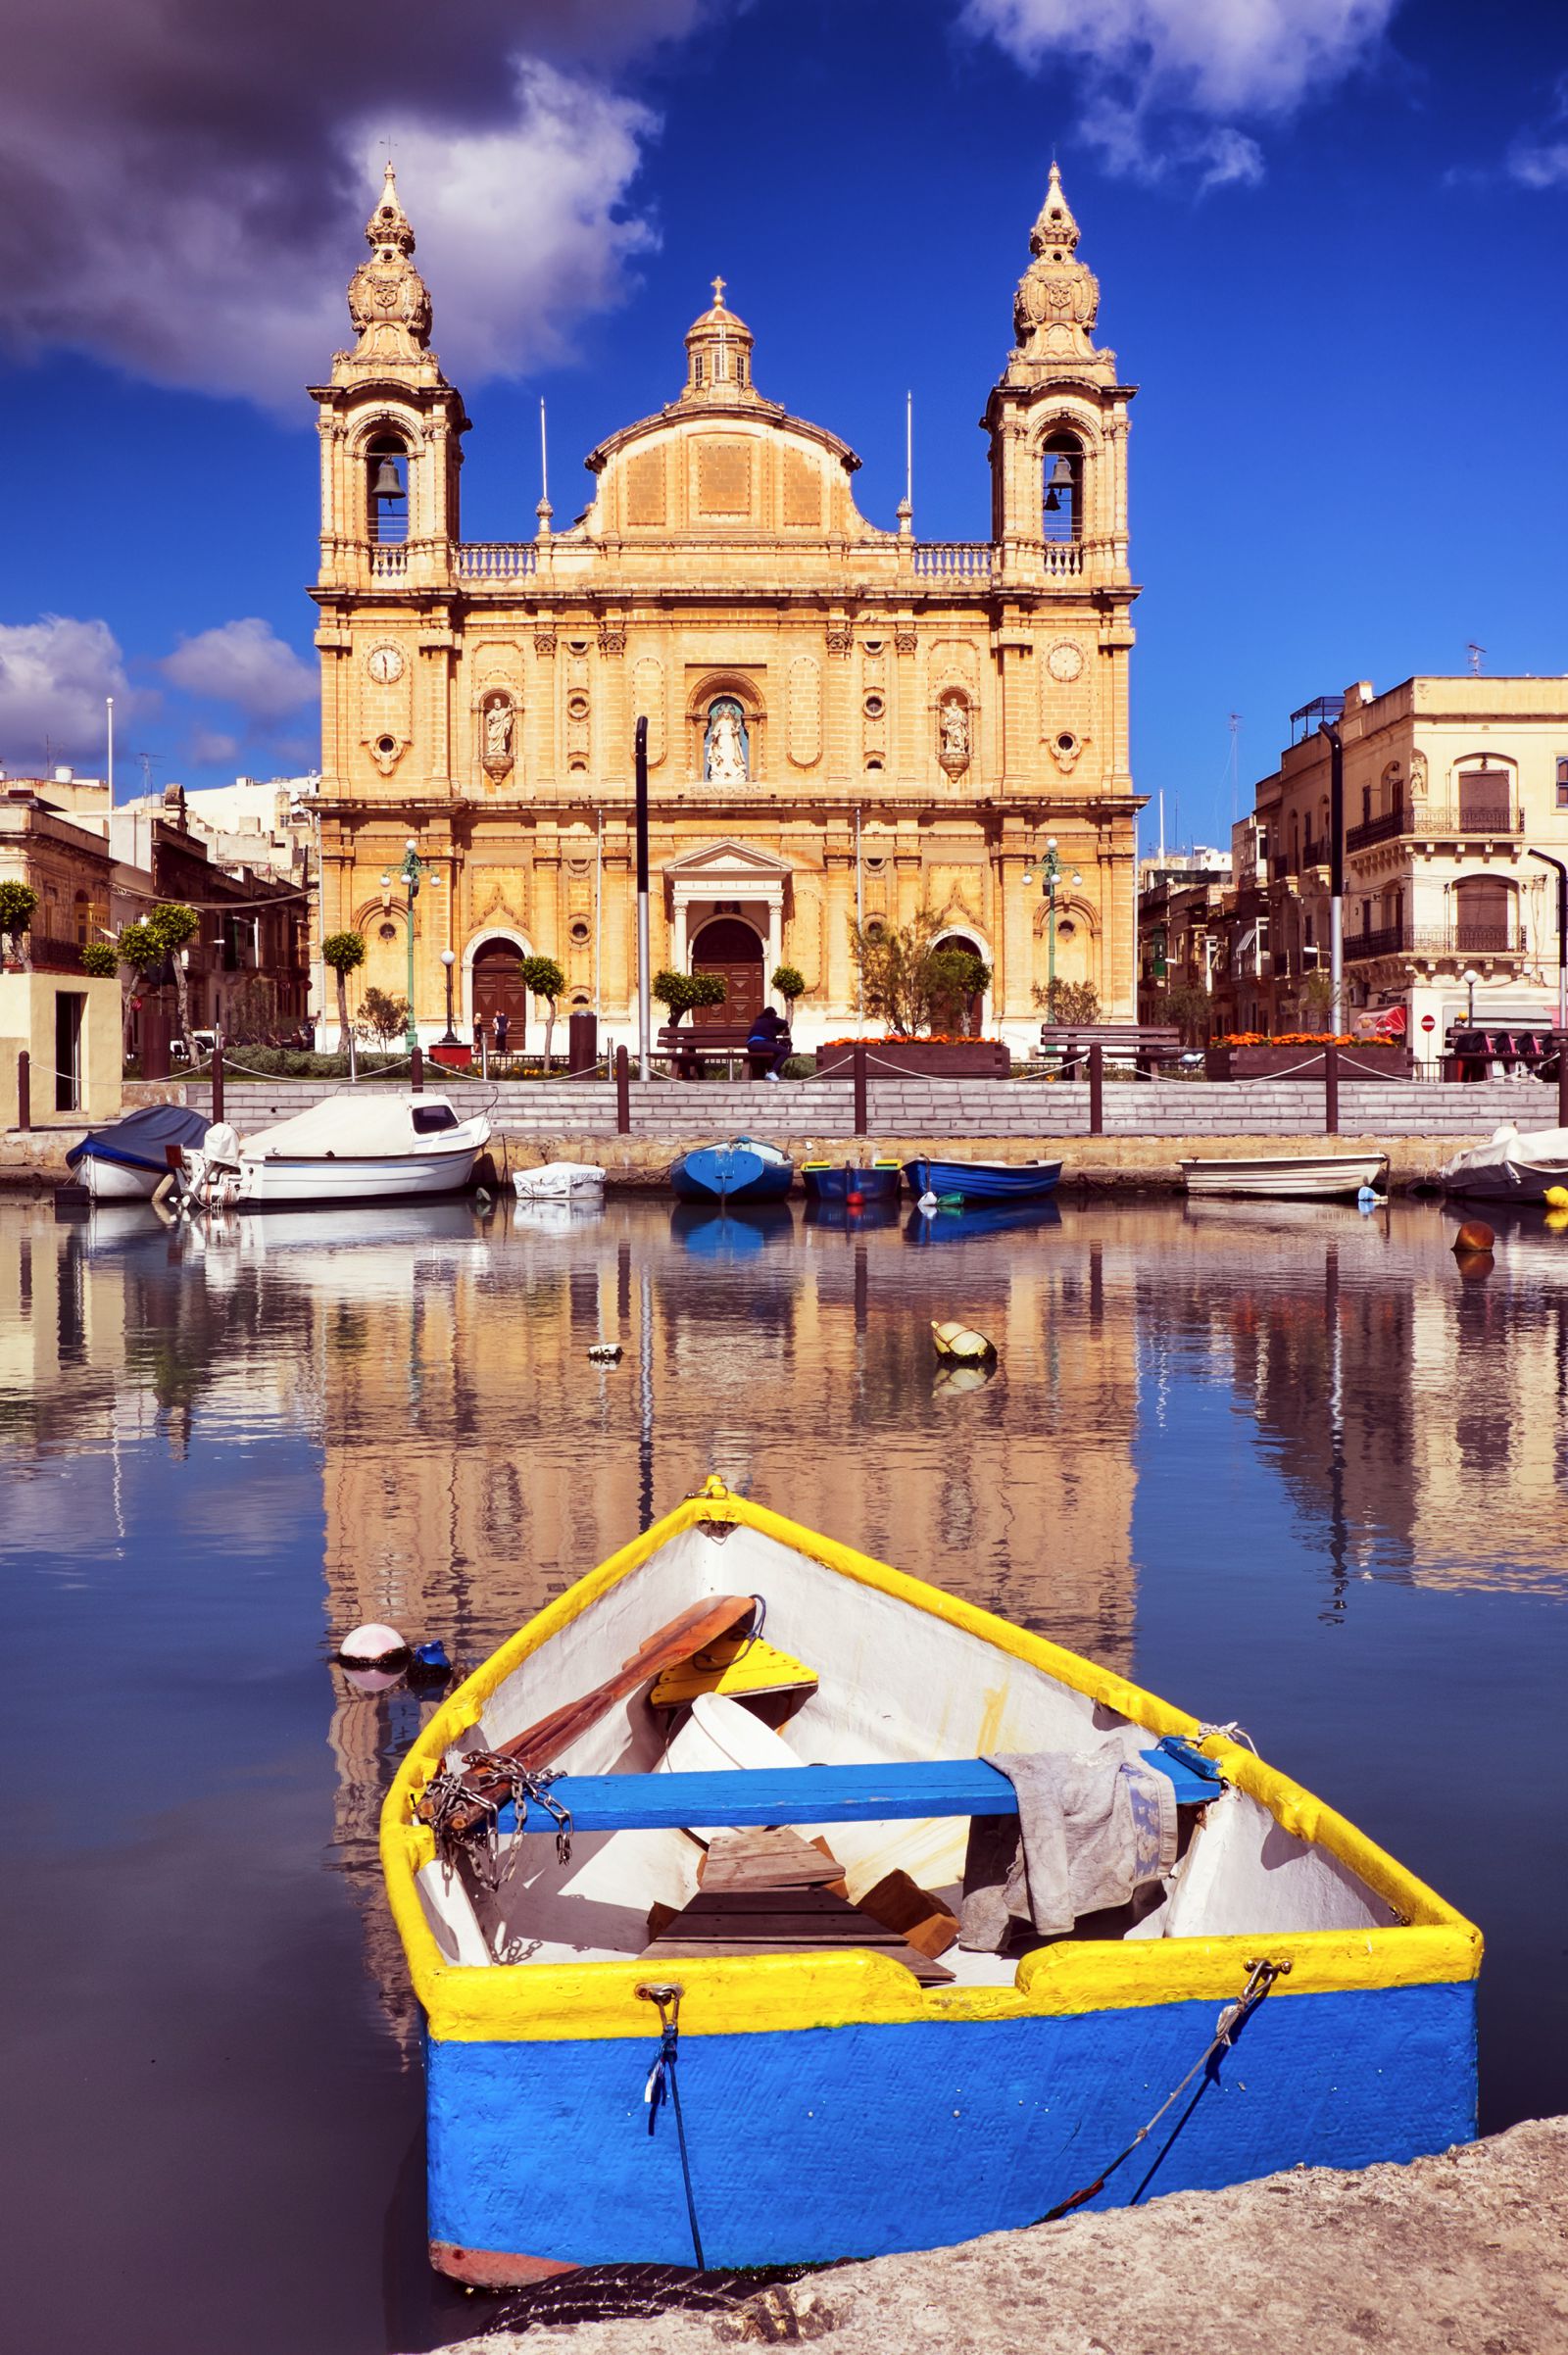 18 Incredible Things You Have To See And Do In Malta And Gozo (20)